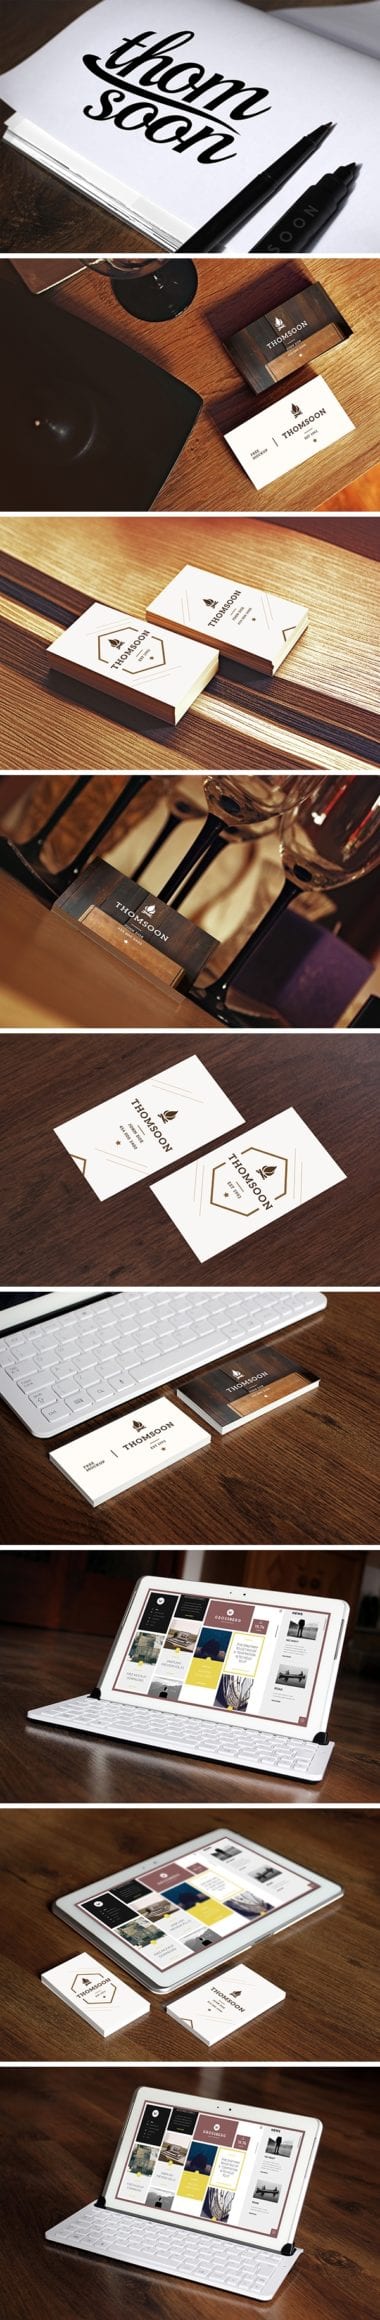 9-business-card-and-tablet-mockup600